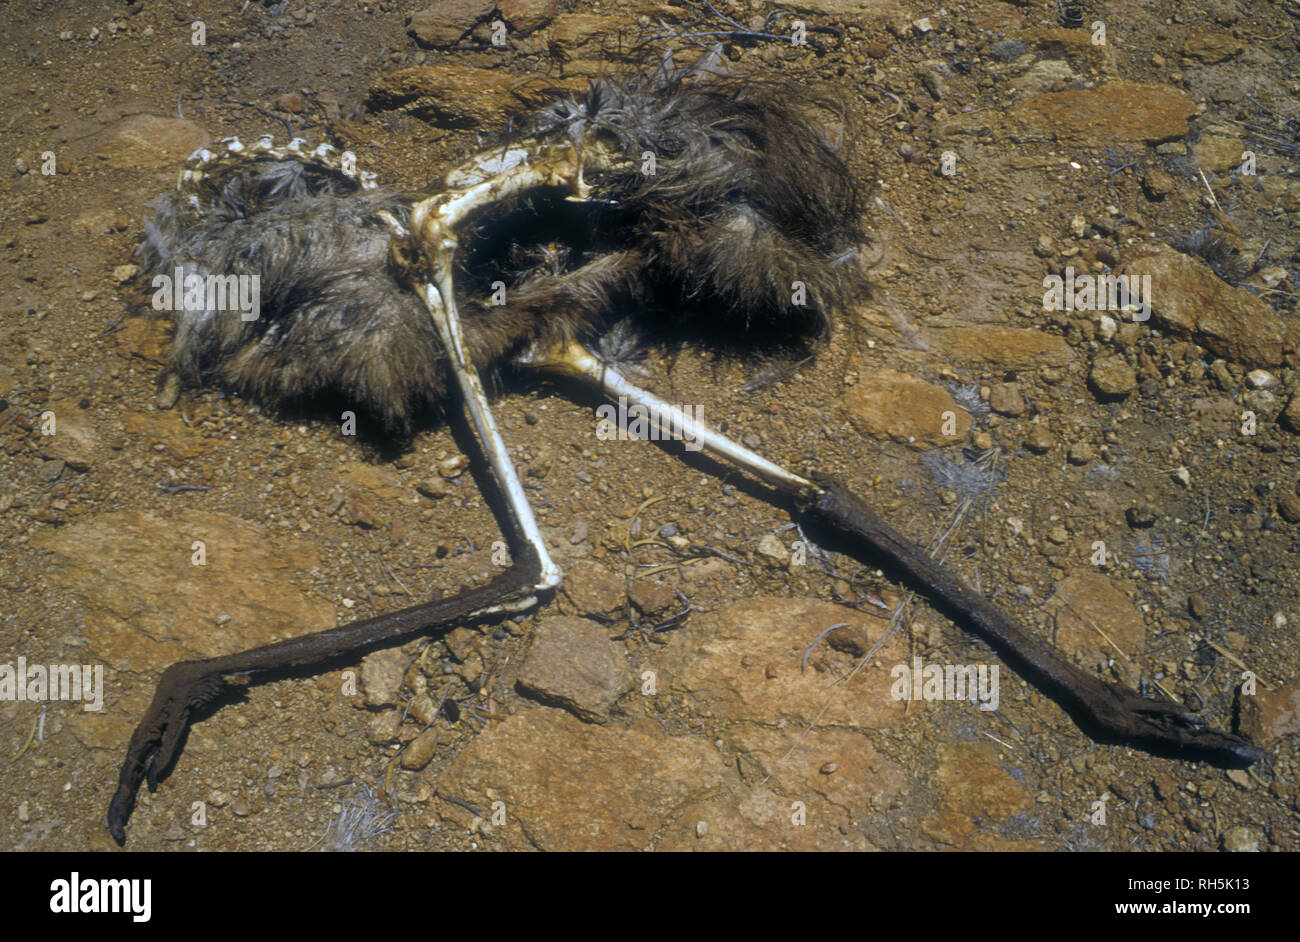 REMAINS OF A DEAD EMU (DROMAIUS NOVAEHOLLANDIAE) OWING TO SEVERE DROUGHT CONDITIONS, GOLDFIELDS AREA OF WESTERN AUSTRALIA. Stock Photo